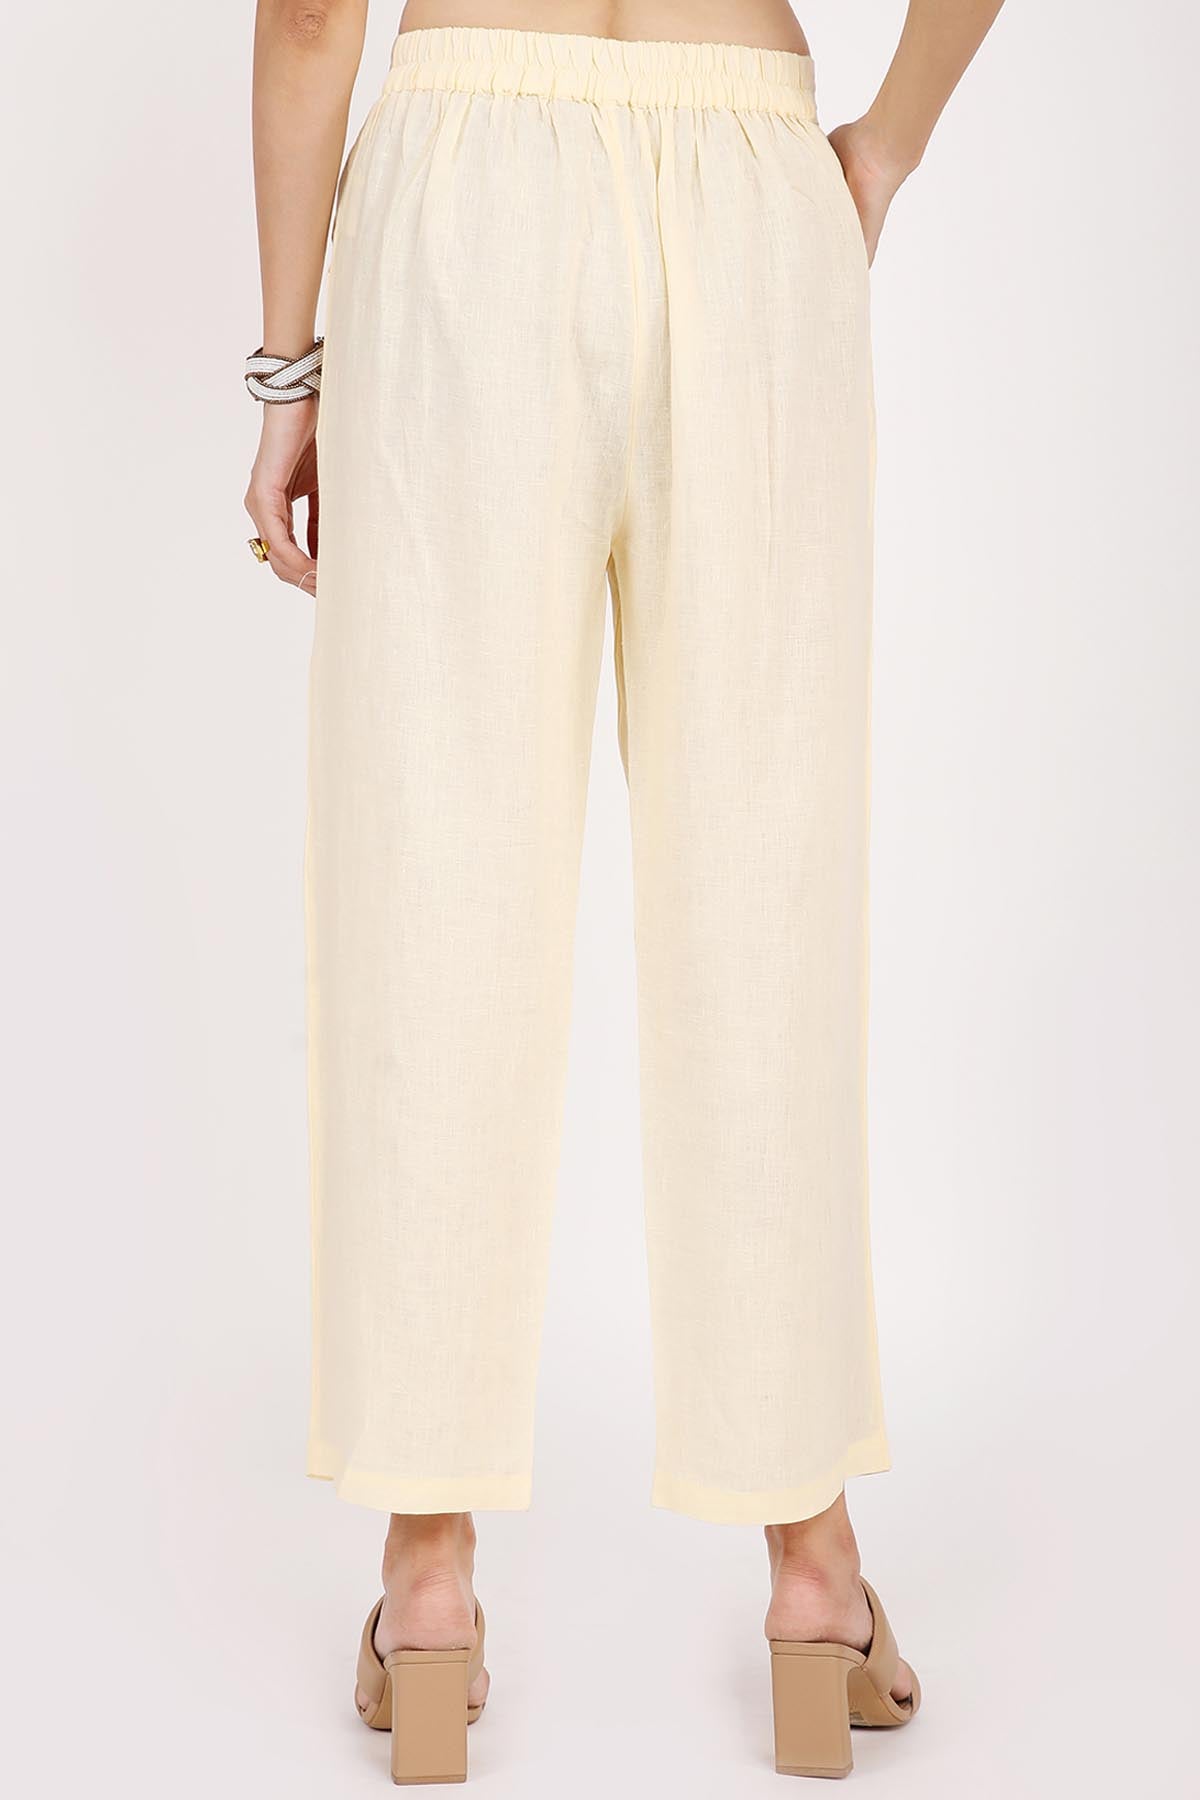 100% Linen Relaxed Fit Pants